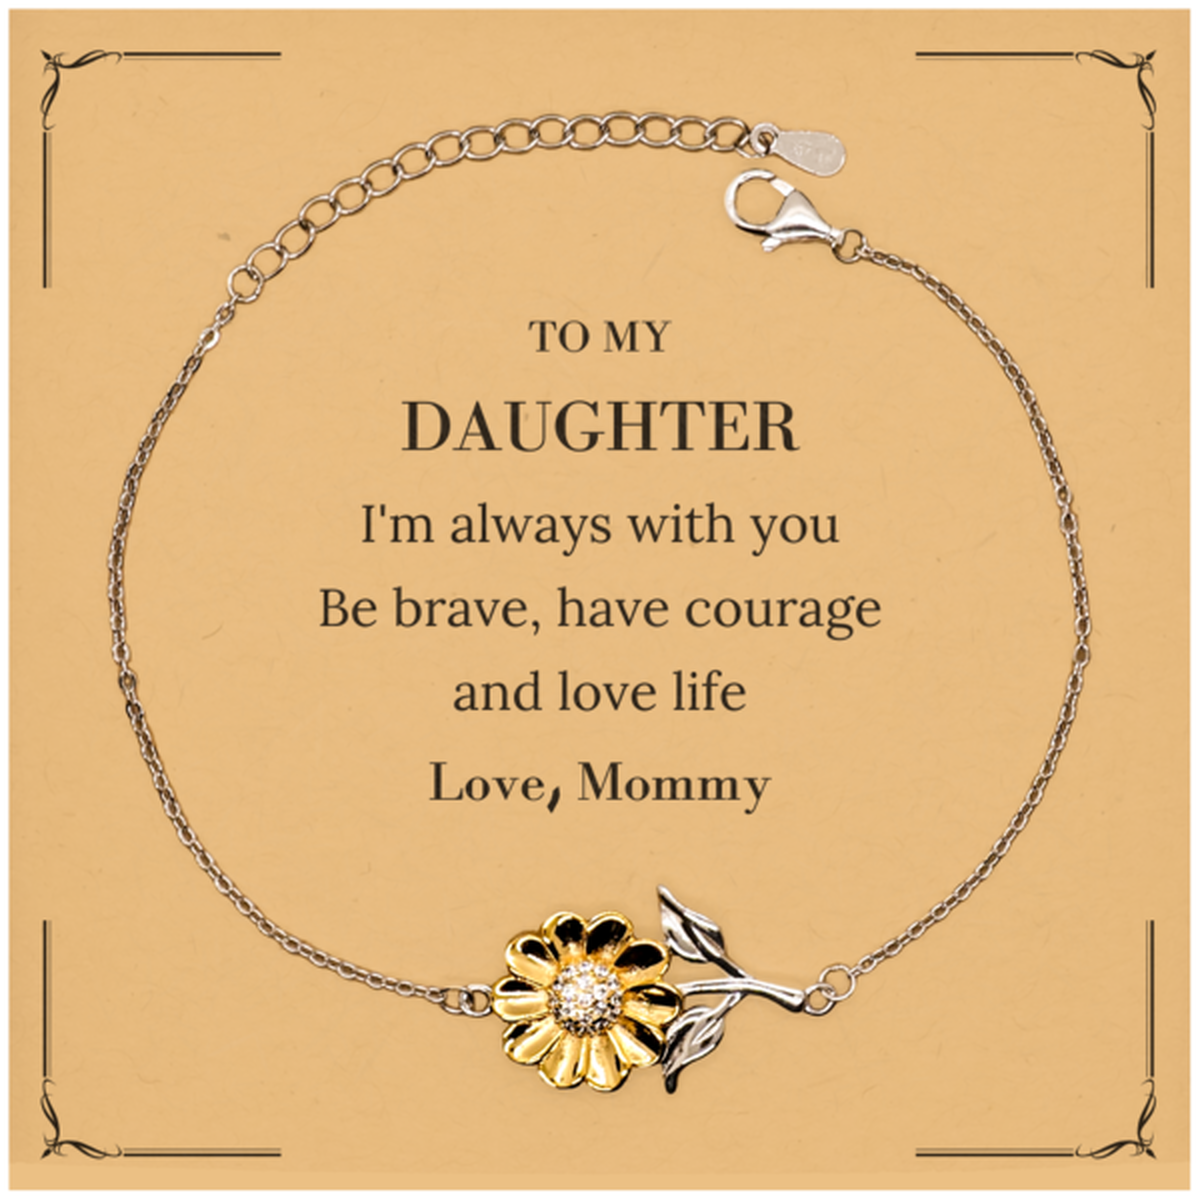 To My Daughter Gifts from Mommy, Unique Sunflower Bracelet Inspirational Christmas Birthday Graduation Gifts for Daughter I'm always with you. Be brave, have courage and love life. Love, Mommy